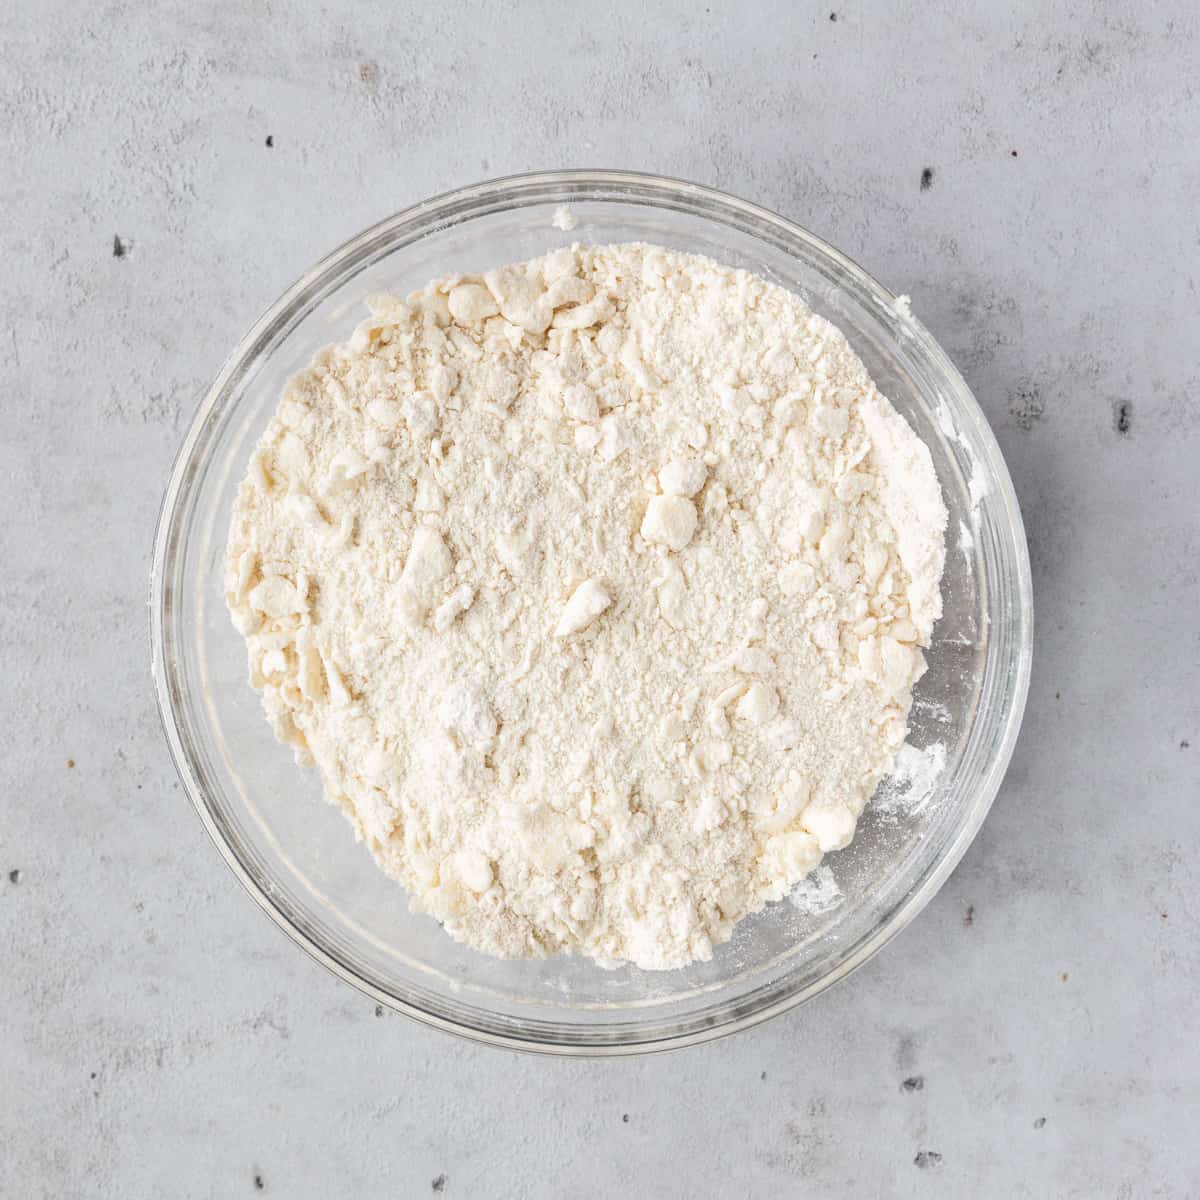 the dry ingredients and butter in a glass bowl on a grey background.